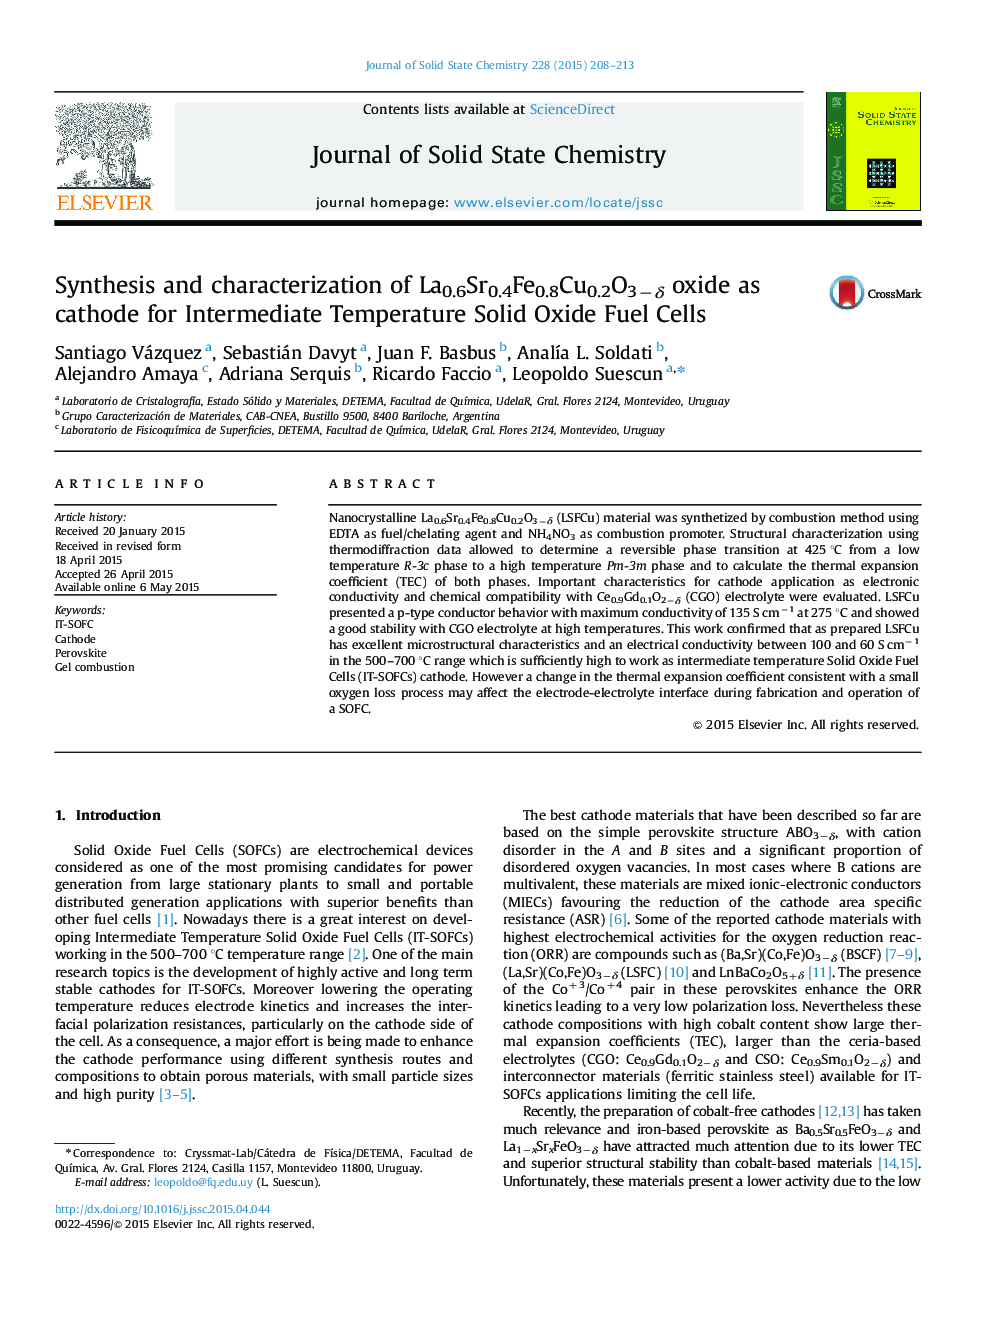 Synthesis and characterization of La0.6Sr0.4Fe0.8Cu0.2O3−δ oxide as cathode for Intermediate Temperature Solid Oxide Fuel Cells